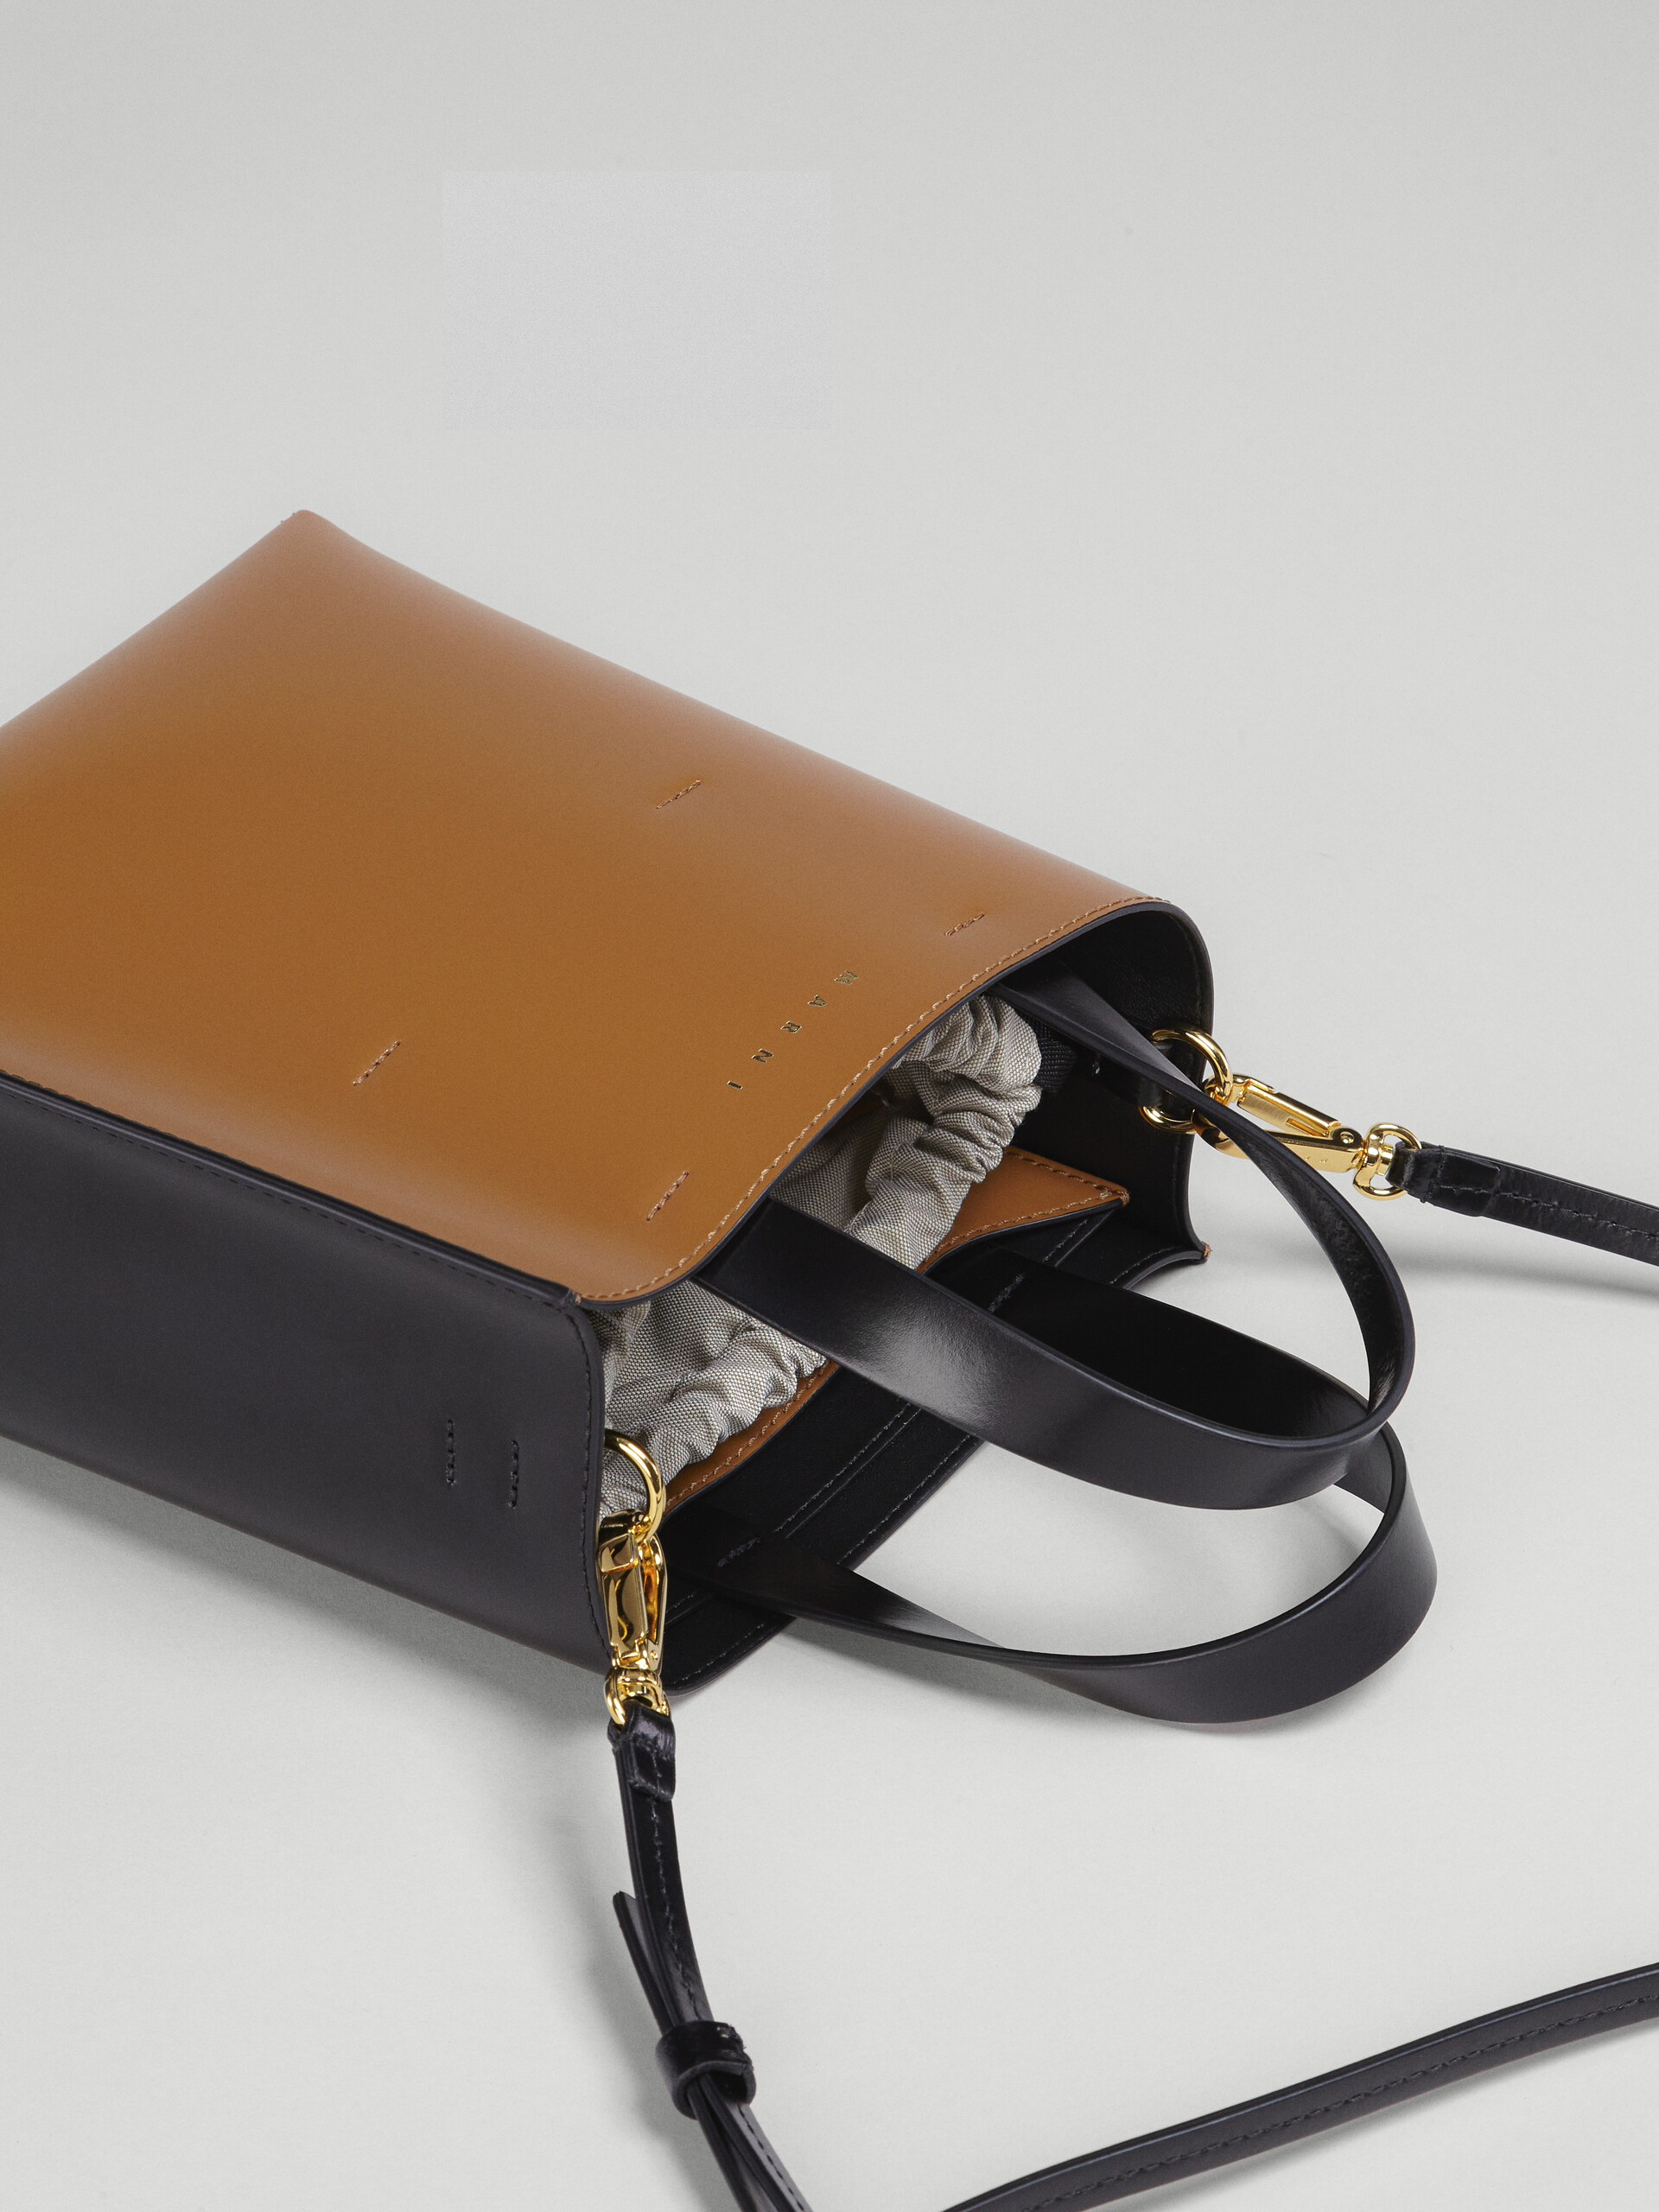 Museo Mini Bag in black and brown leather - Shopping Bags - Image 4